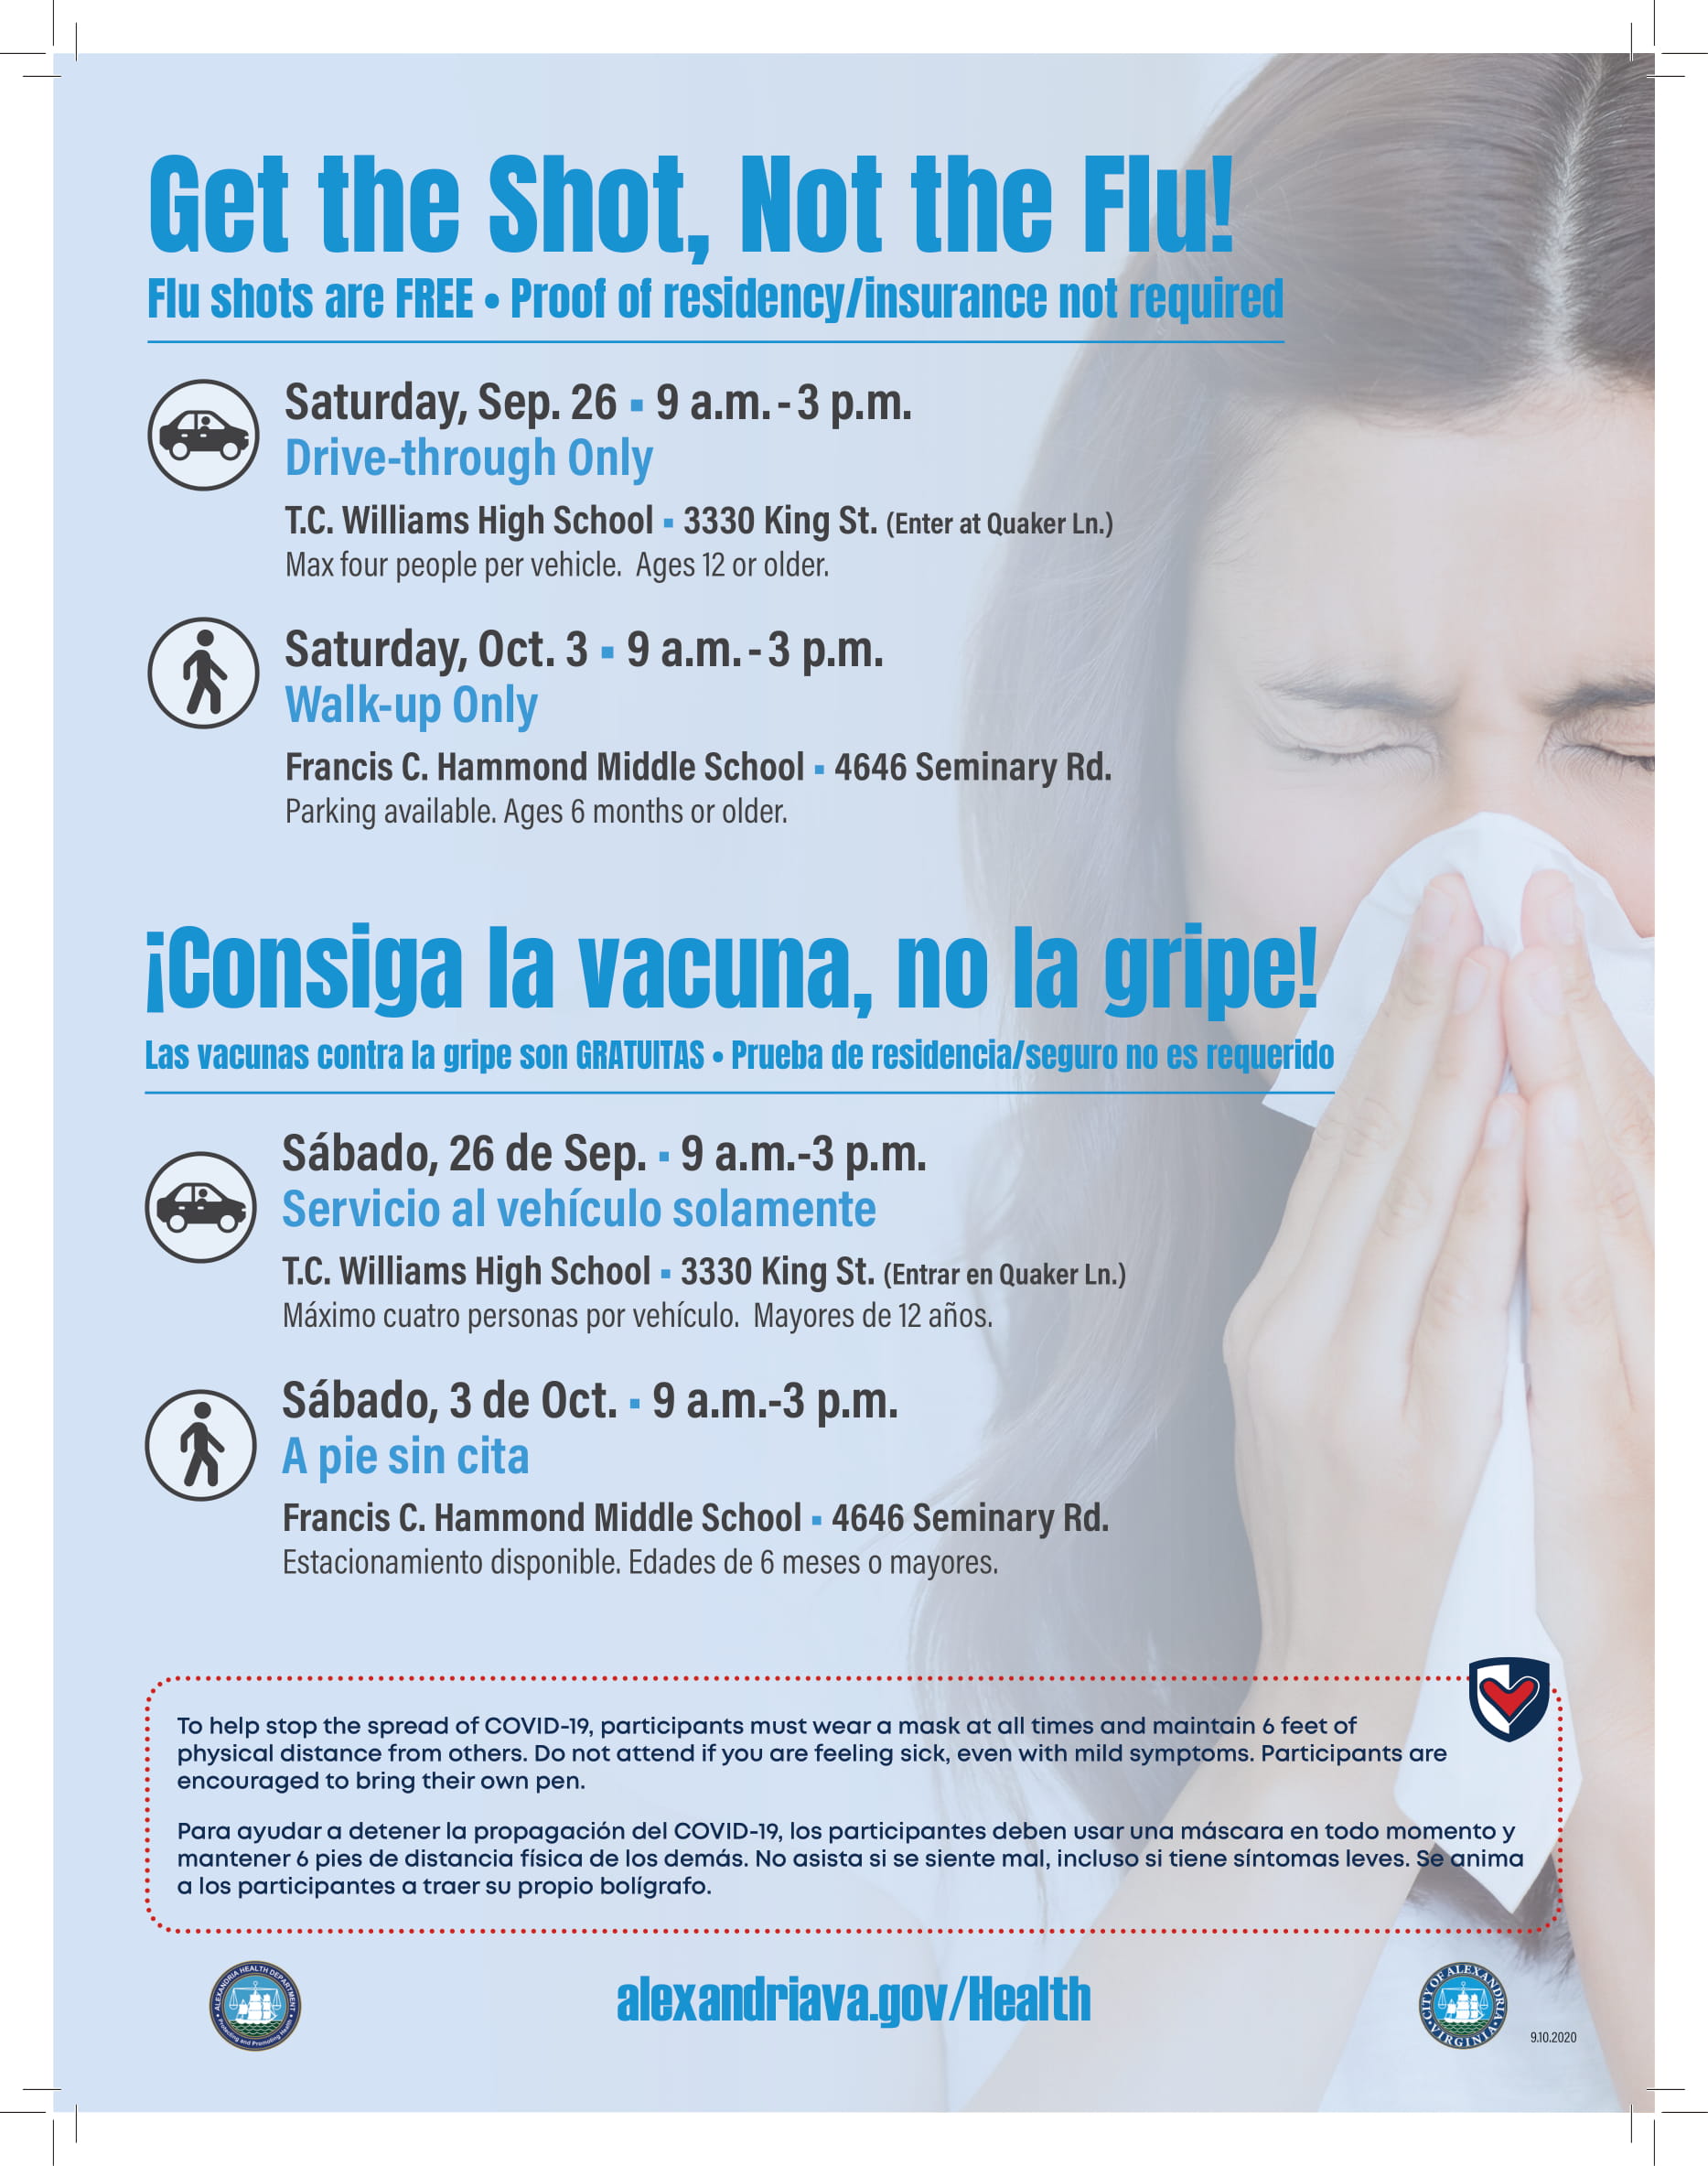 Free Covid19 Testing and Free Flu Shots Available in Alexandria